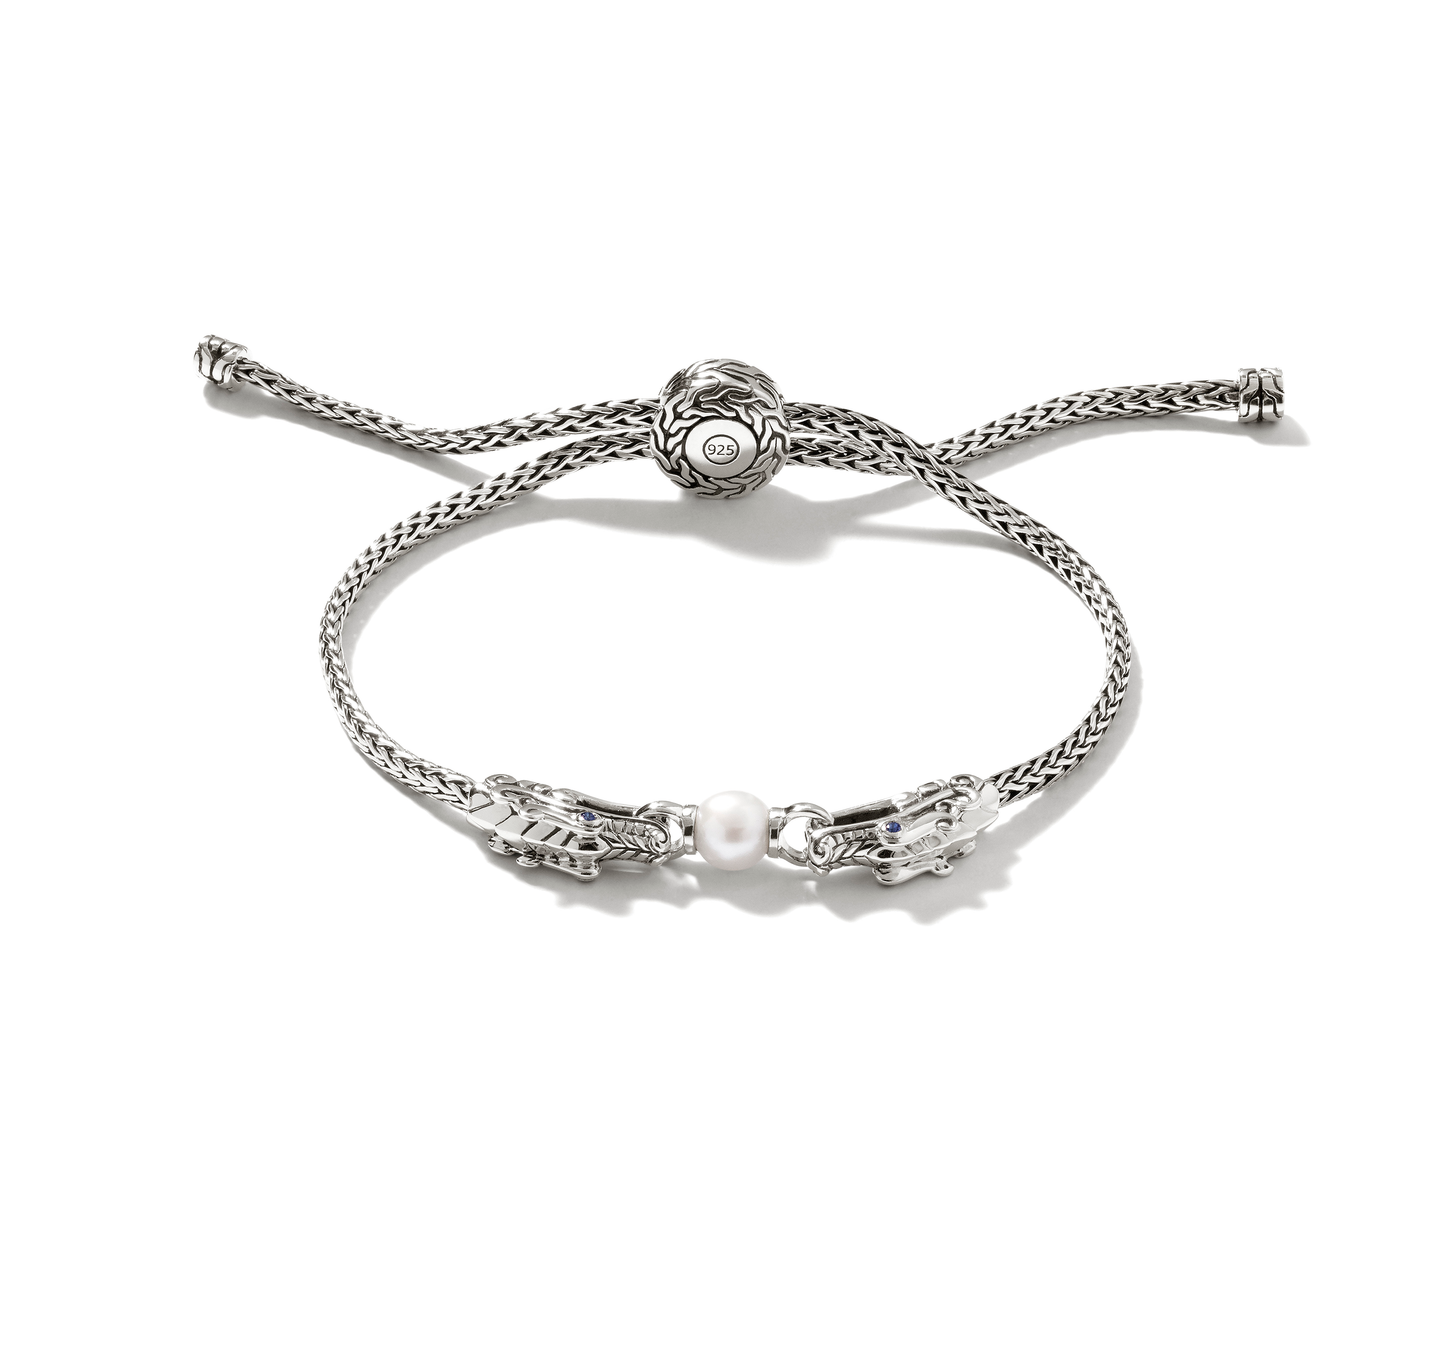 John Hardy Silver Chain Dragon Pull Through Bracelet with Fresh Water Pearl